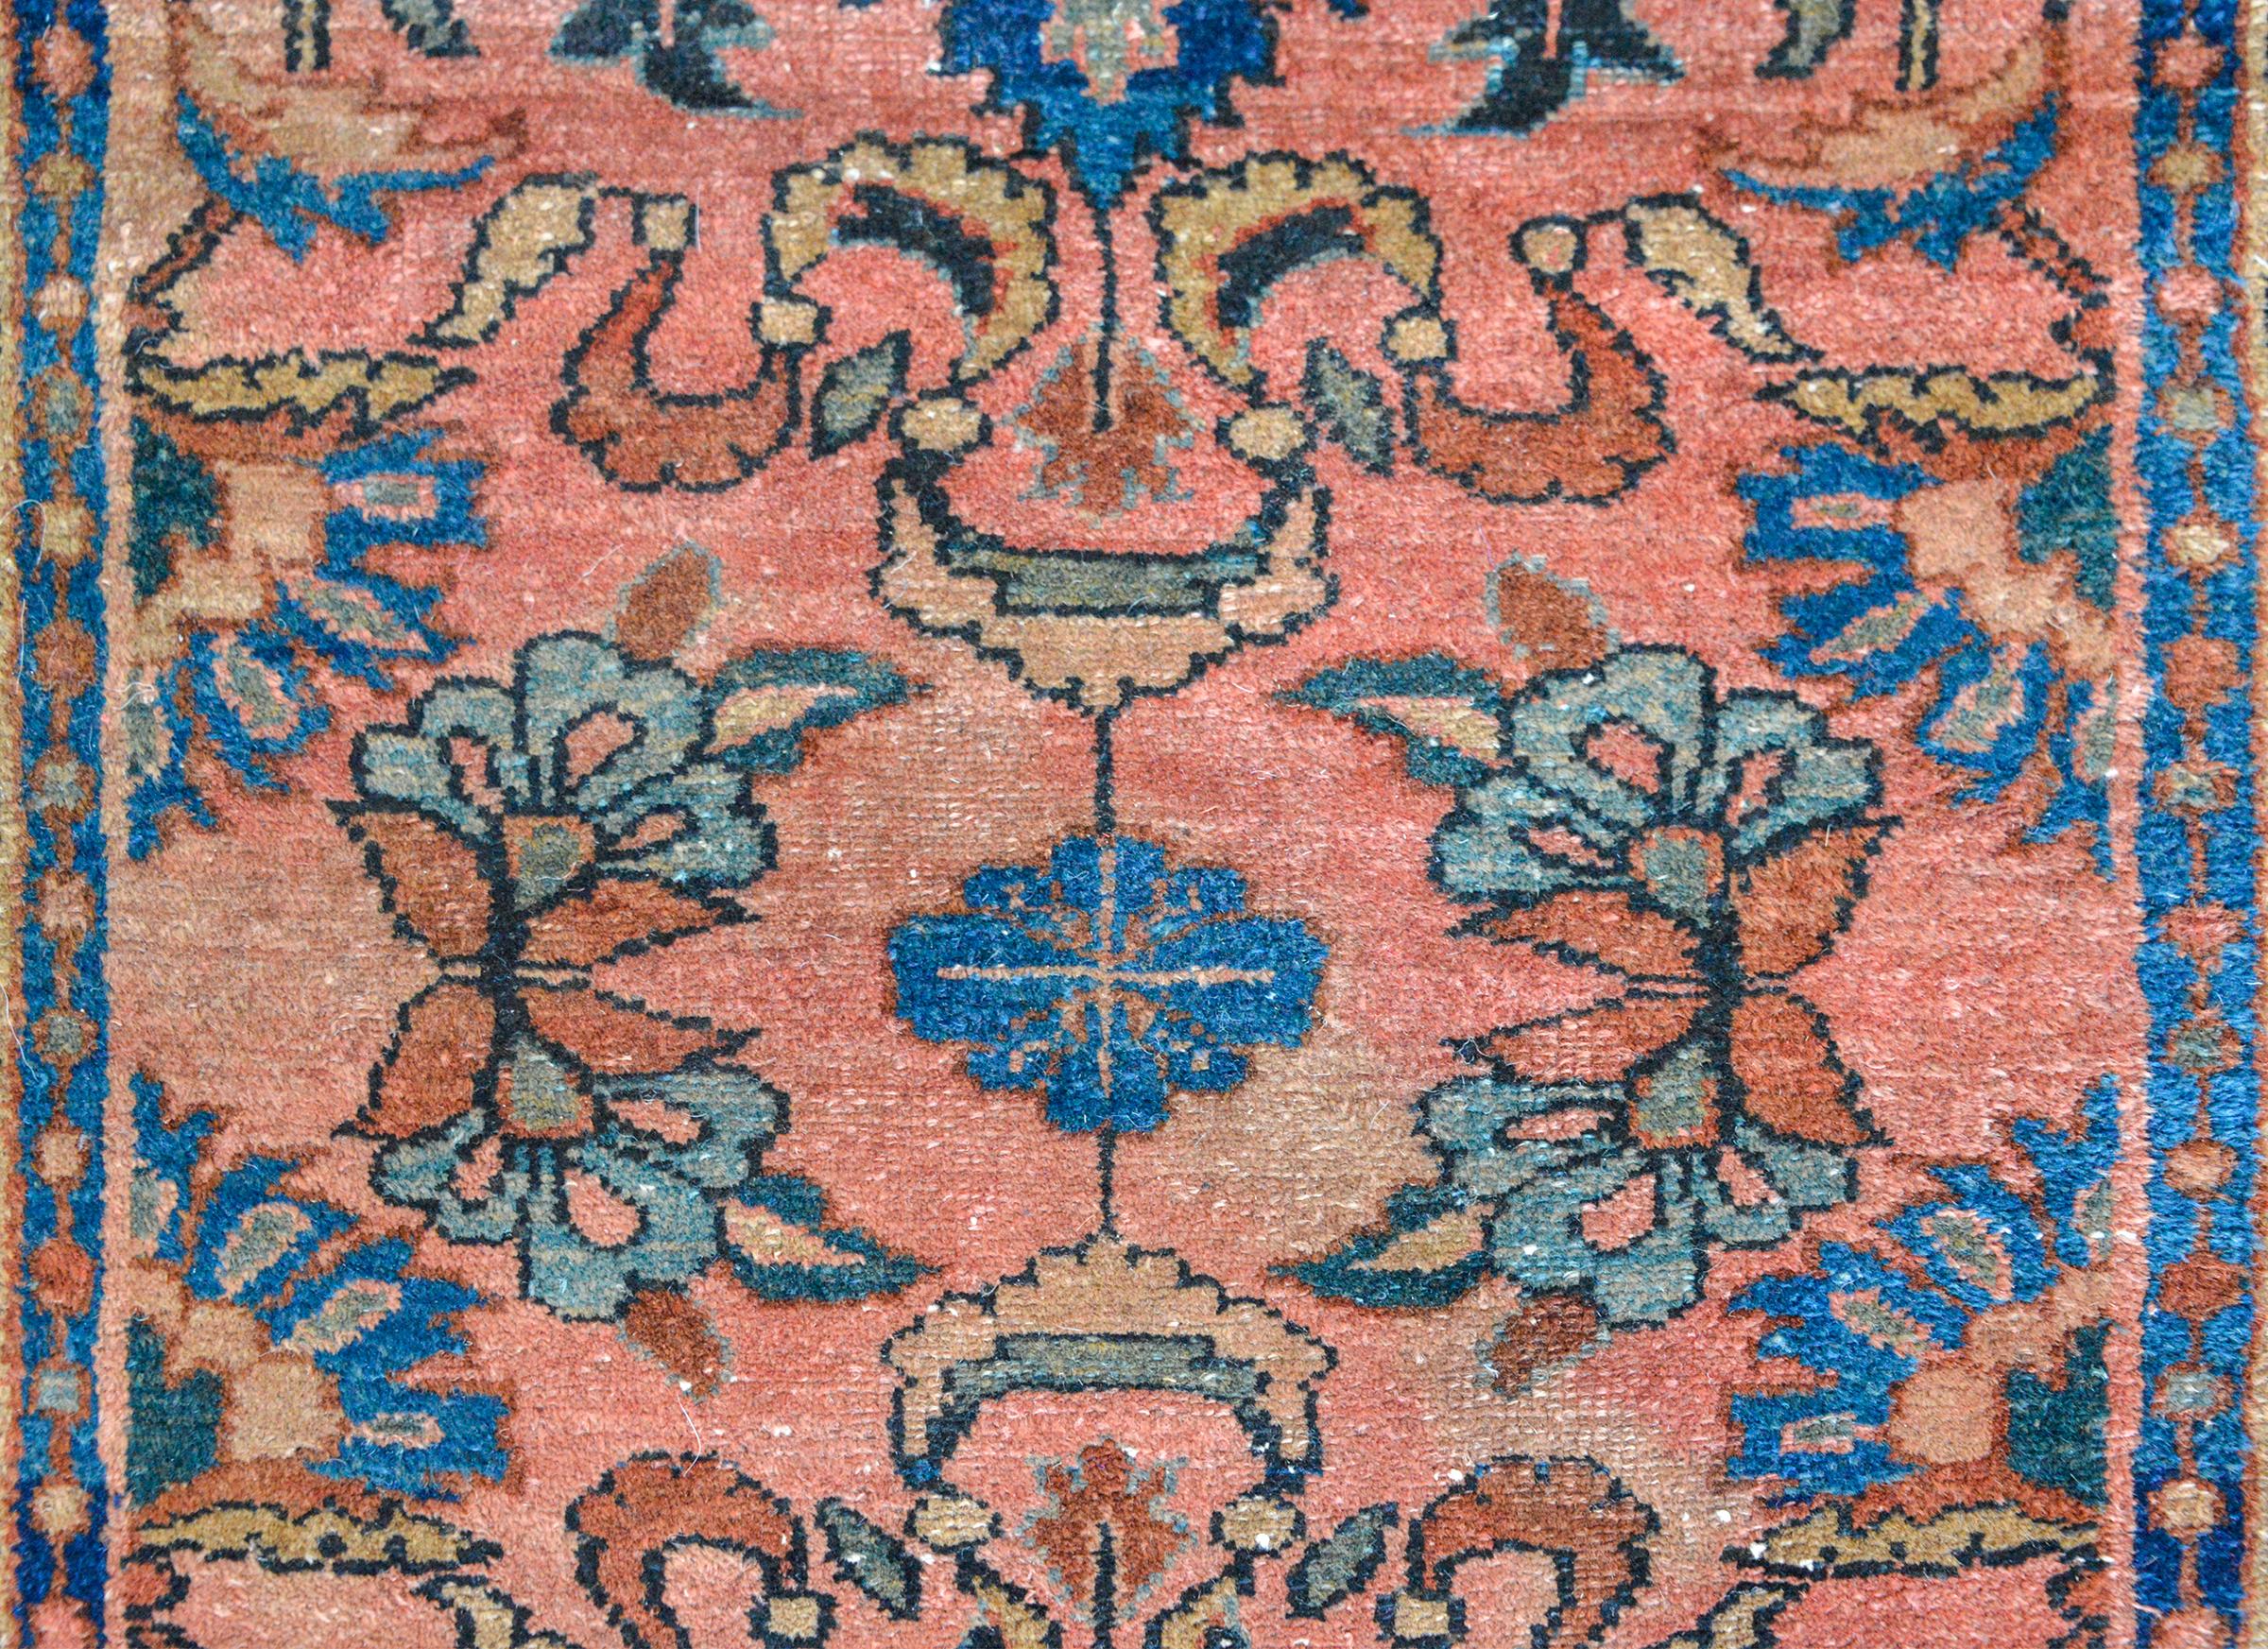 An early 20th century Persian Lilihan rug with a mirrored floral pattern woven in light and dark indigo, cream, and coral, against a pink background, and surrounded by three petite geometric pattered stripes.